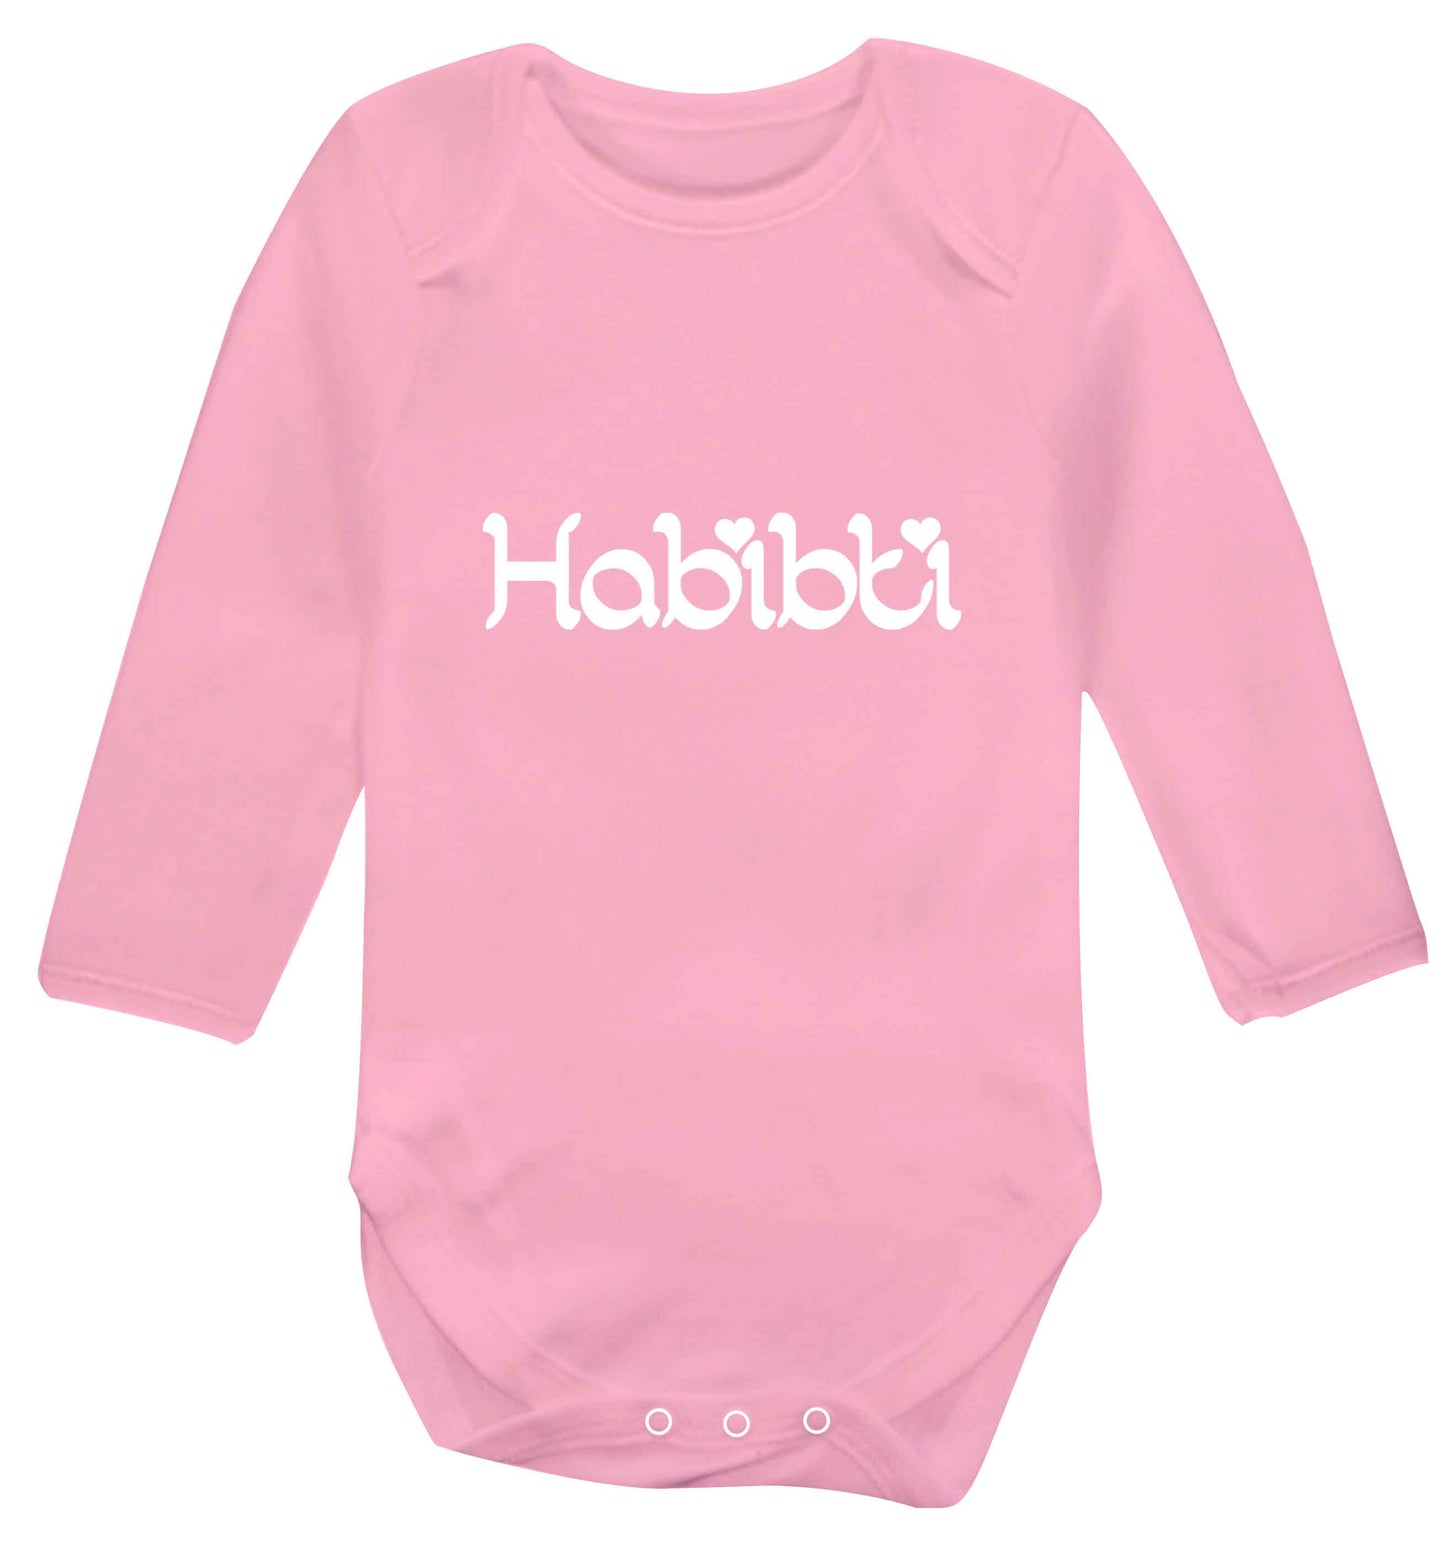 Habibiti baby vest long sleeved pale pink 6-12 months